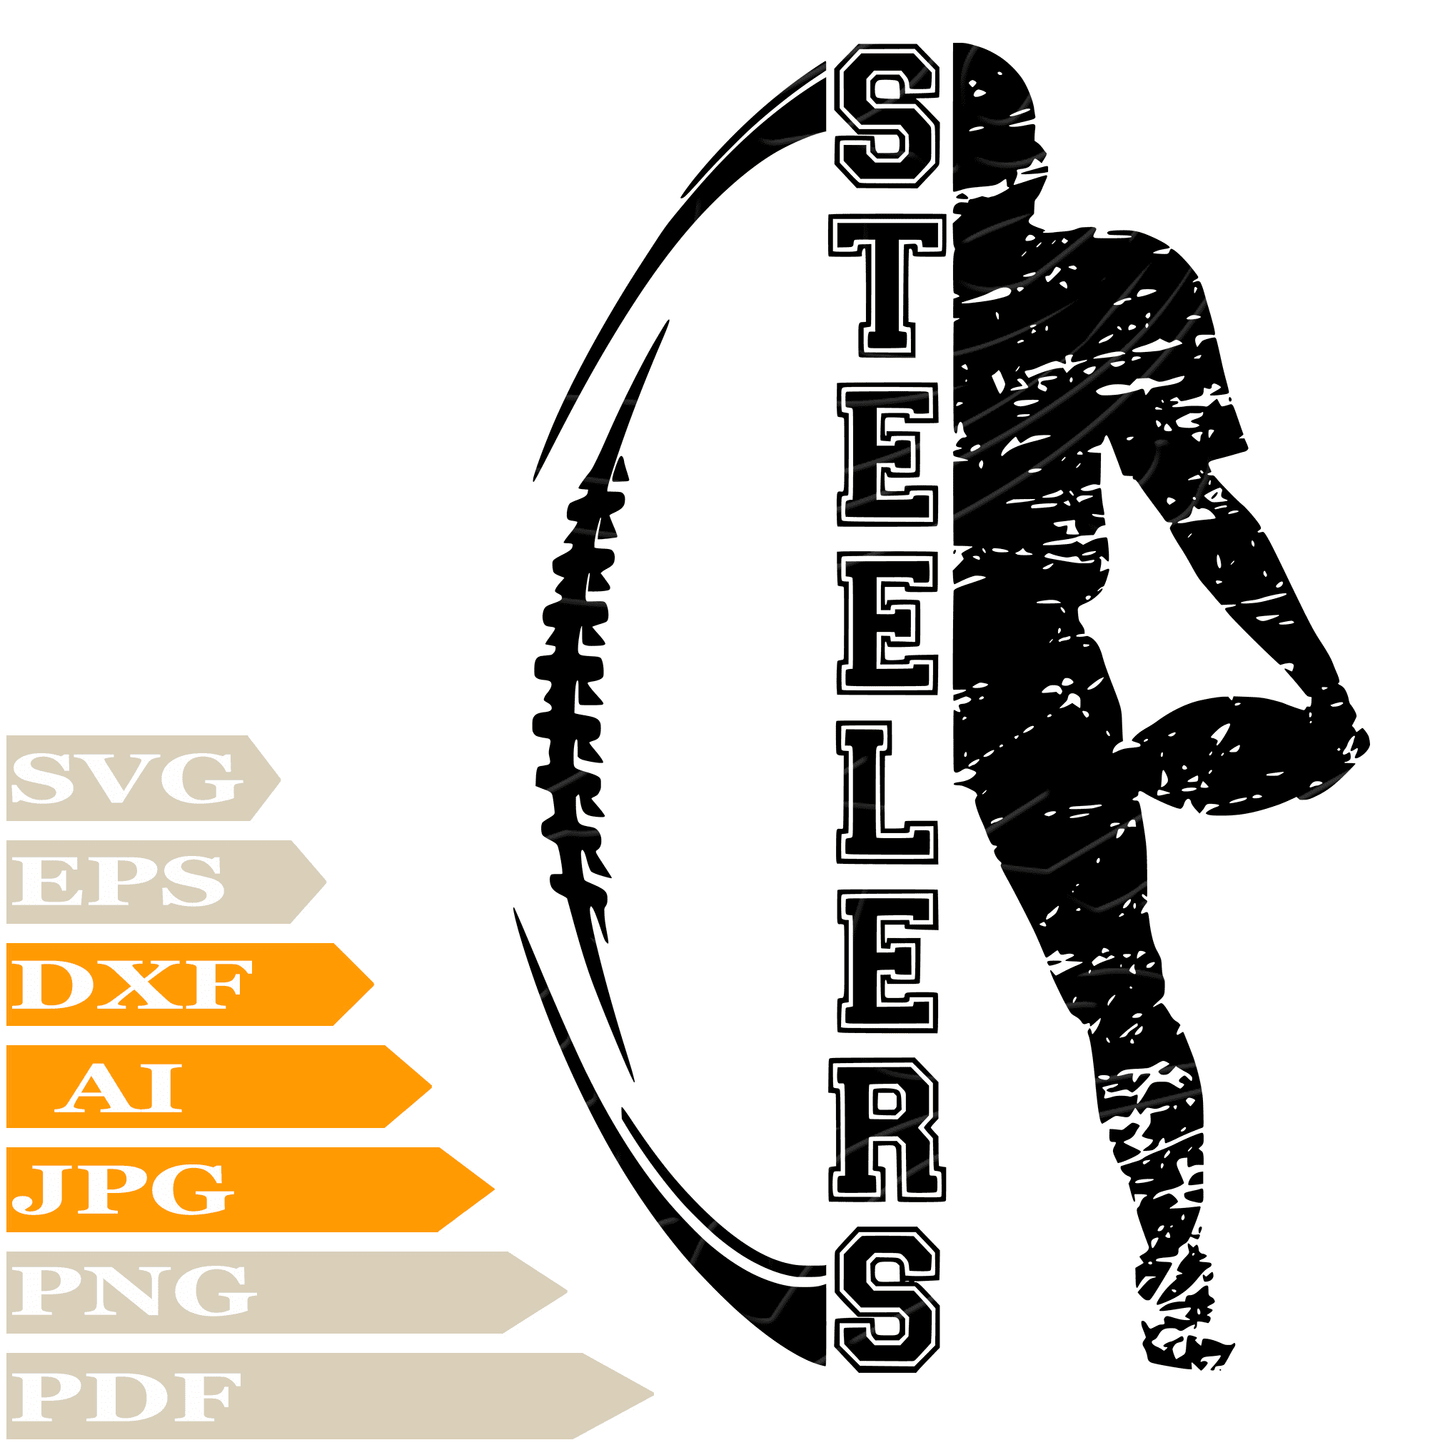 Steelers Football SVG-Pittsburgh Steelers Team Mascot Personalized SVG-Pittsburgh Steelers Logo Drawing SVG-Pittsburgh Steelers Vector Illustration-PNG-Decal-Cricut-Digital Files-Clip Art-Cut File-For Shirts-Silhouette